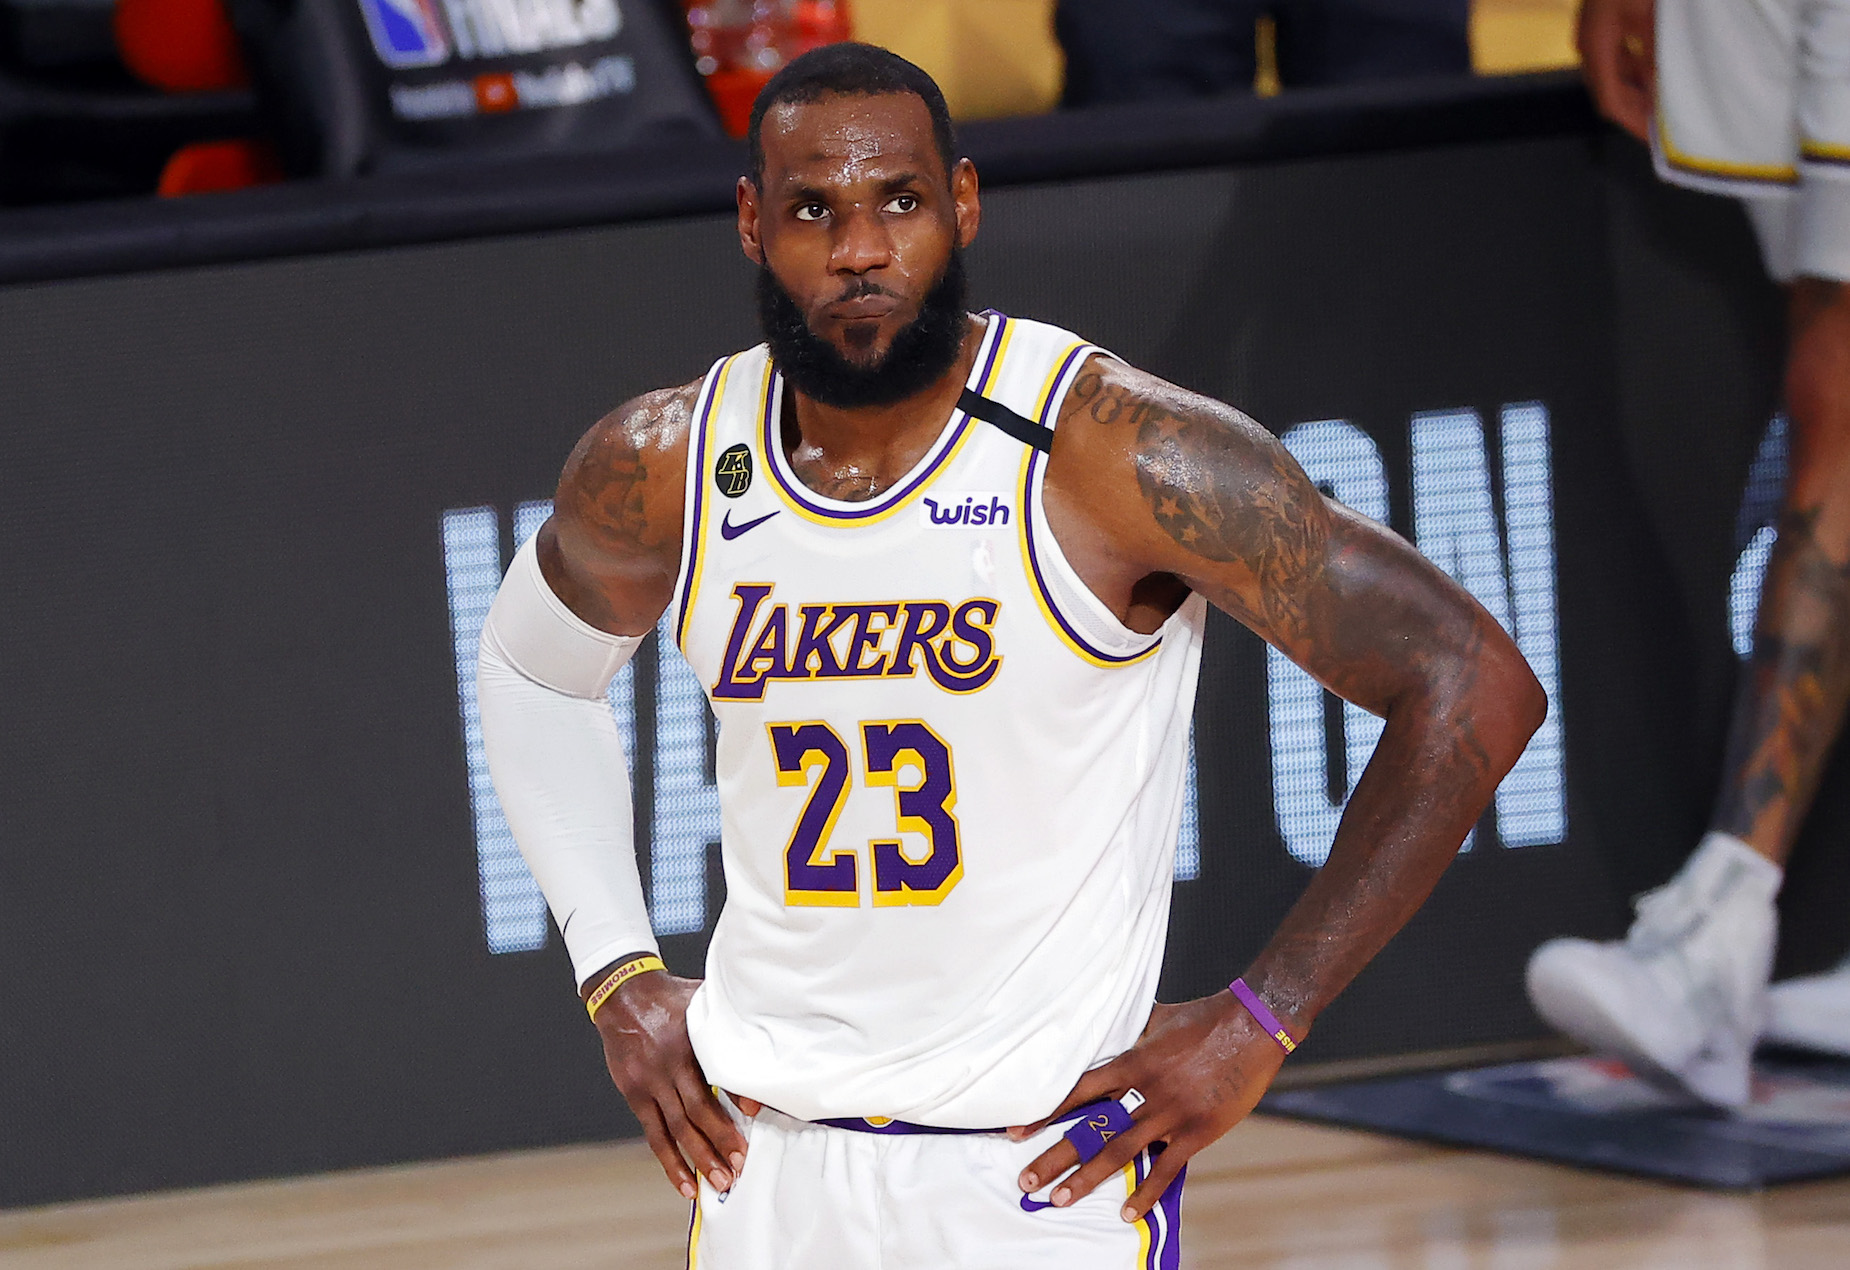 The LA Lakers dropped Game 3 of the NBA Finals but LeBron James isn't too concerned.